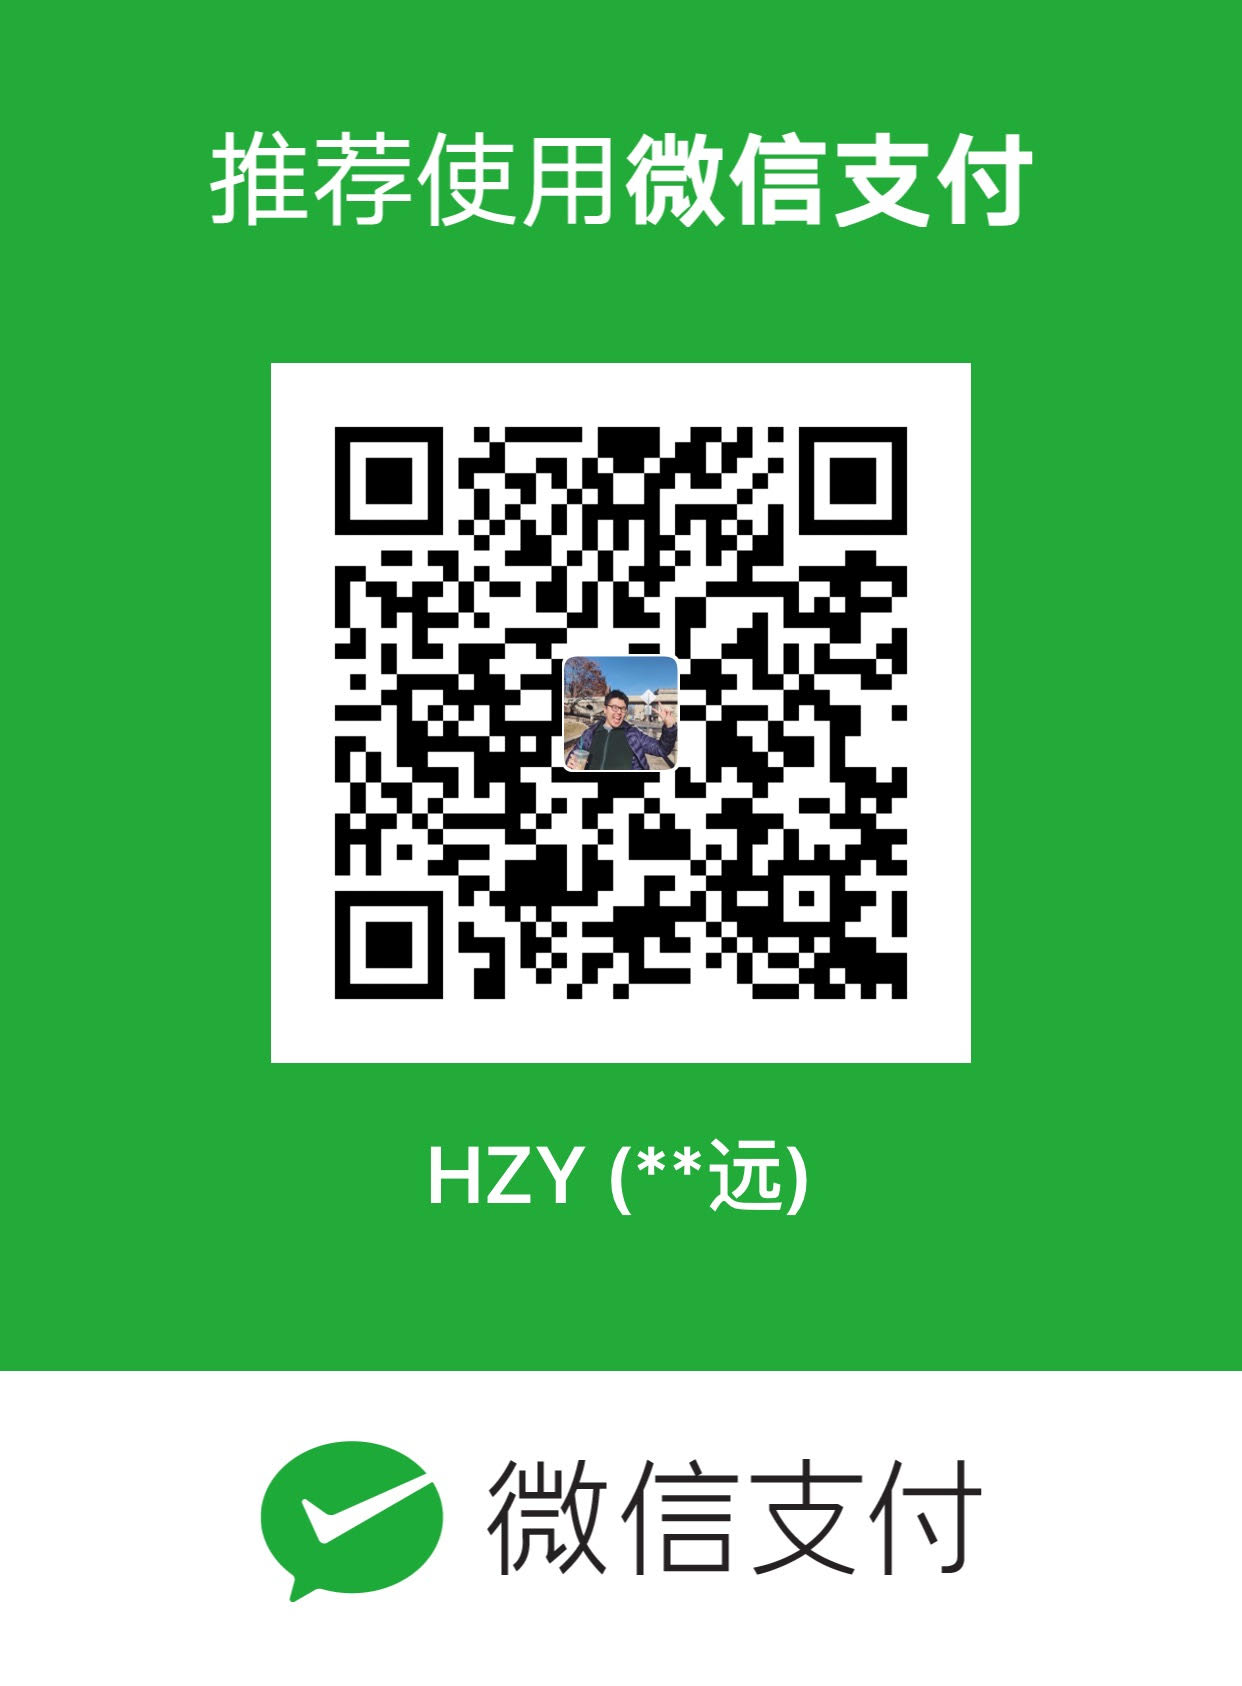 wechat pay